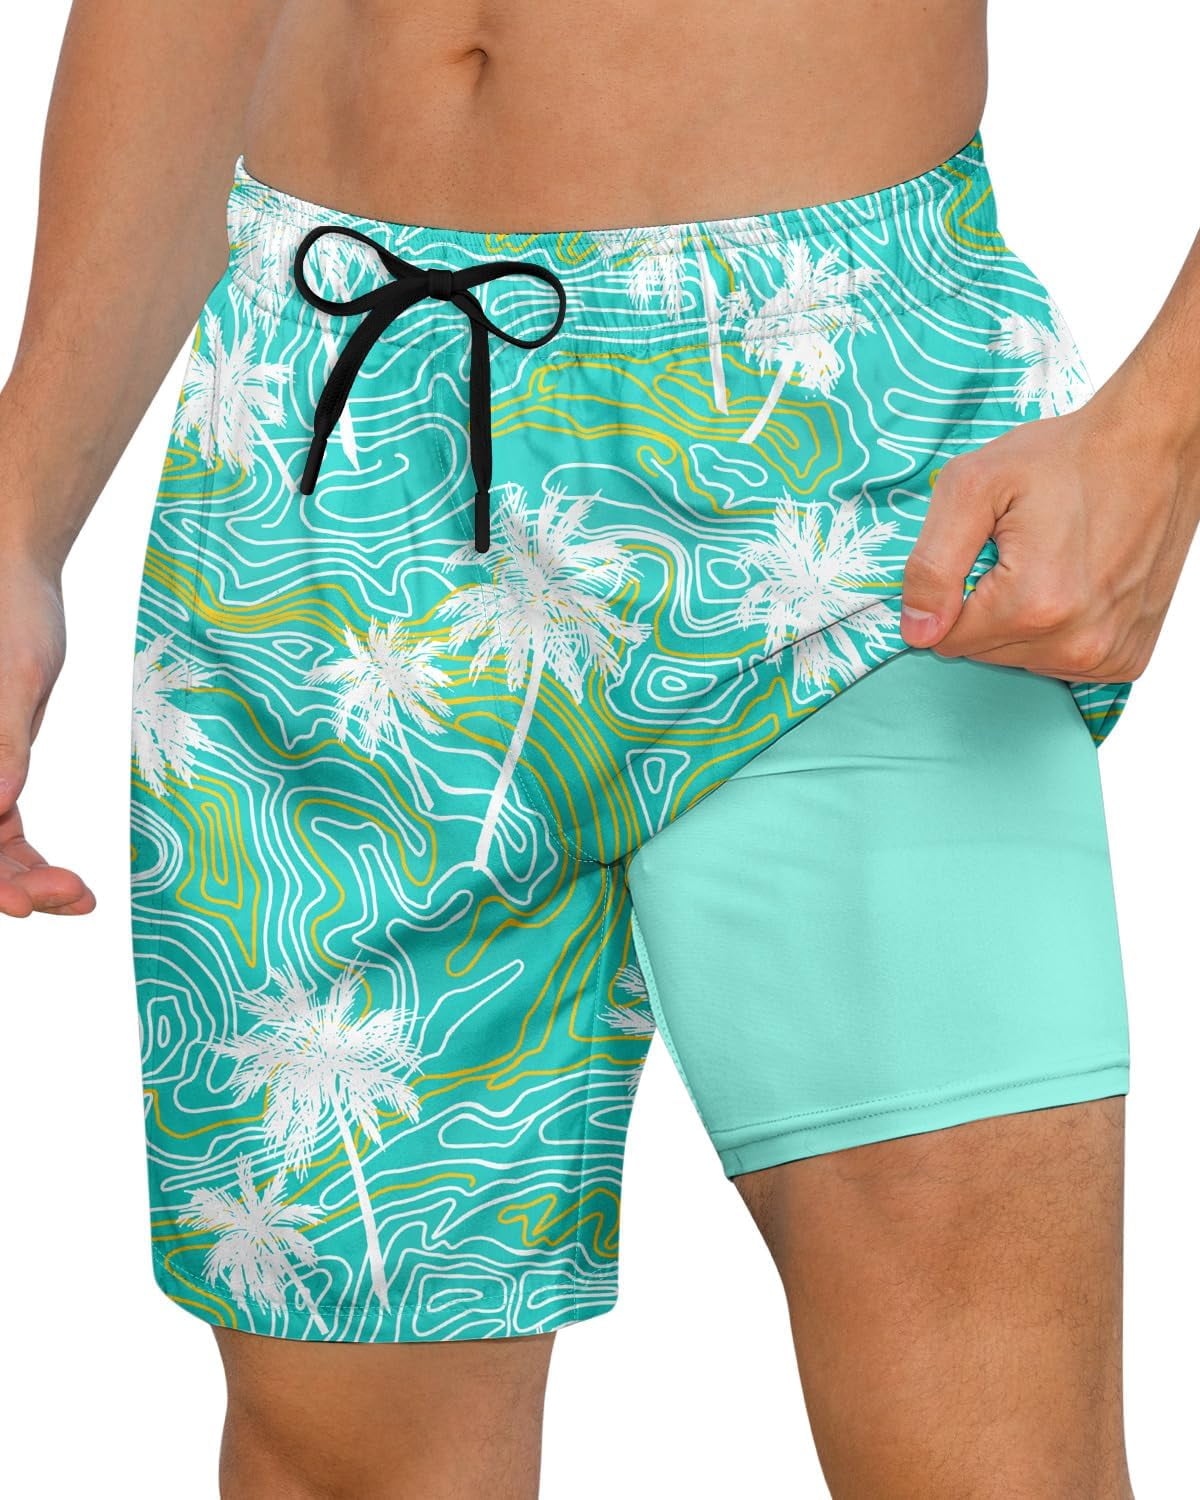 Axwujok Mens Swimming Trunks with Compression Liner Swim Shorts 7 inch ...